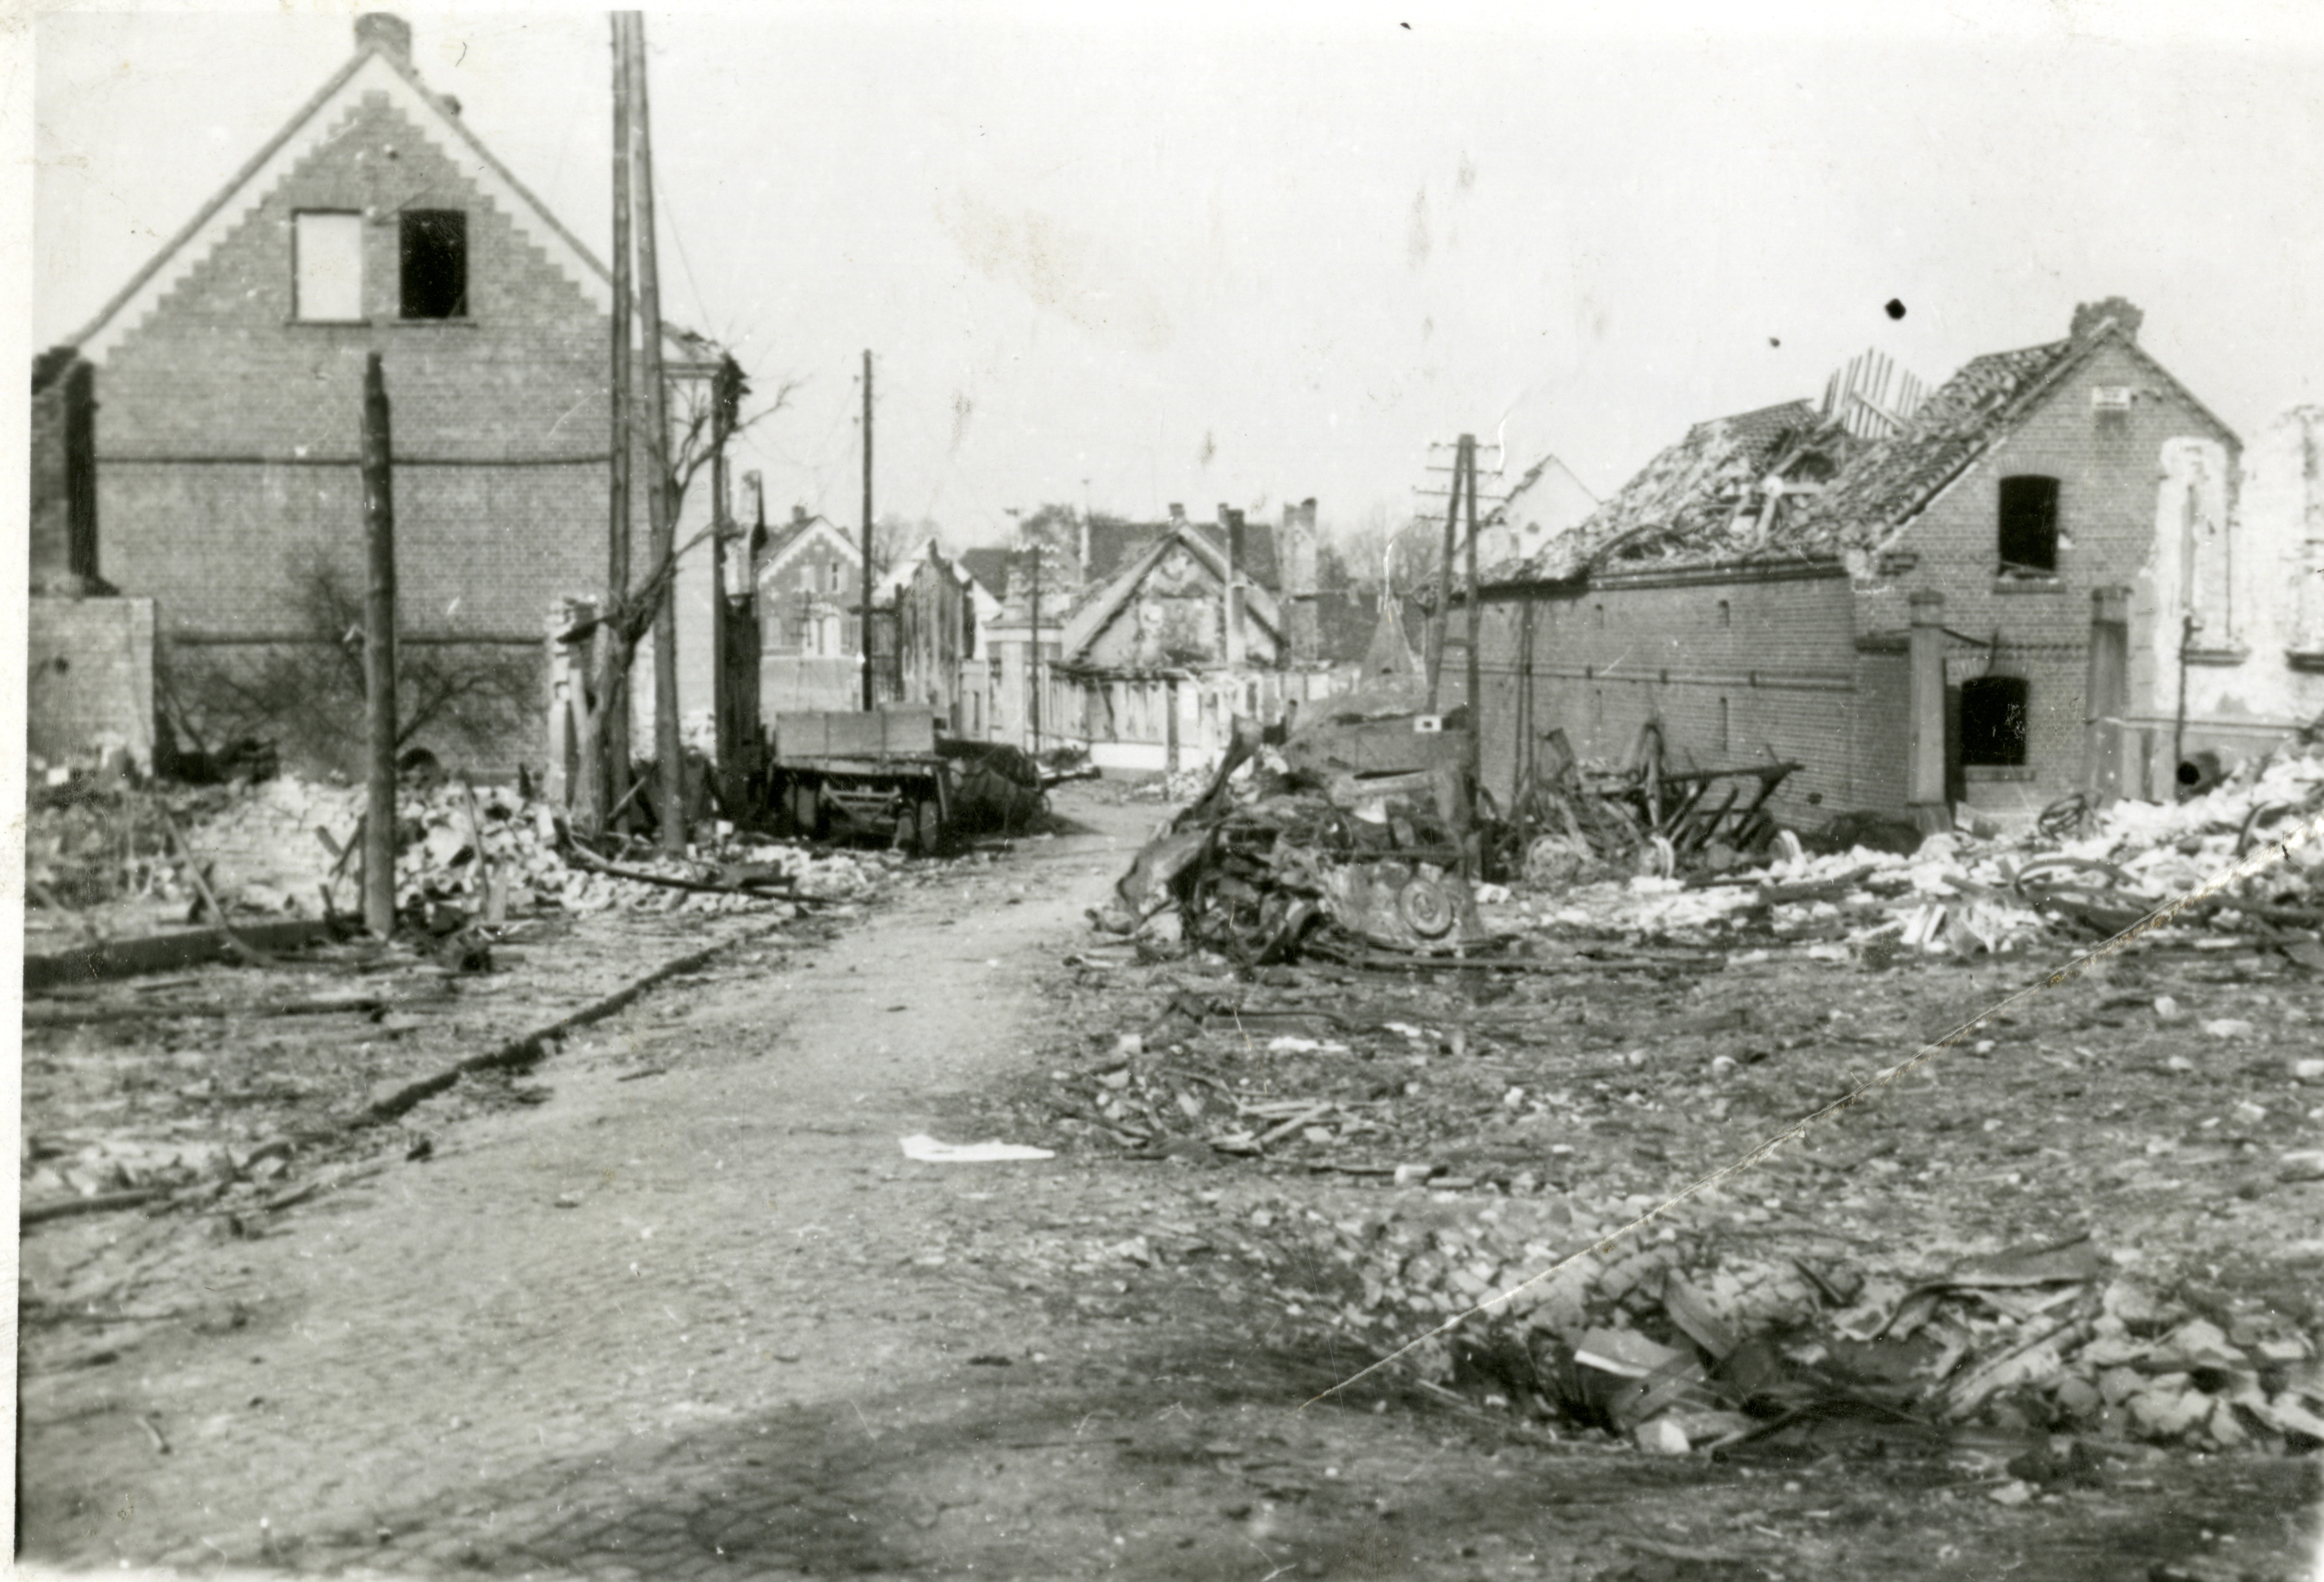 War torn town in Germany in 1945 | The Digital Collections of the ...